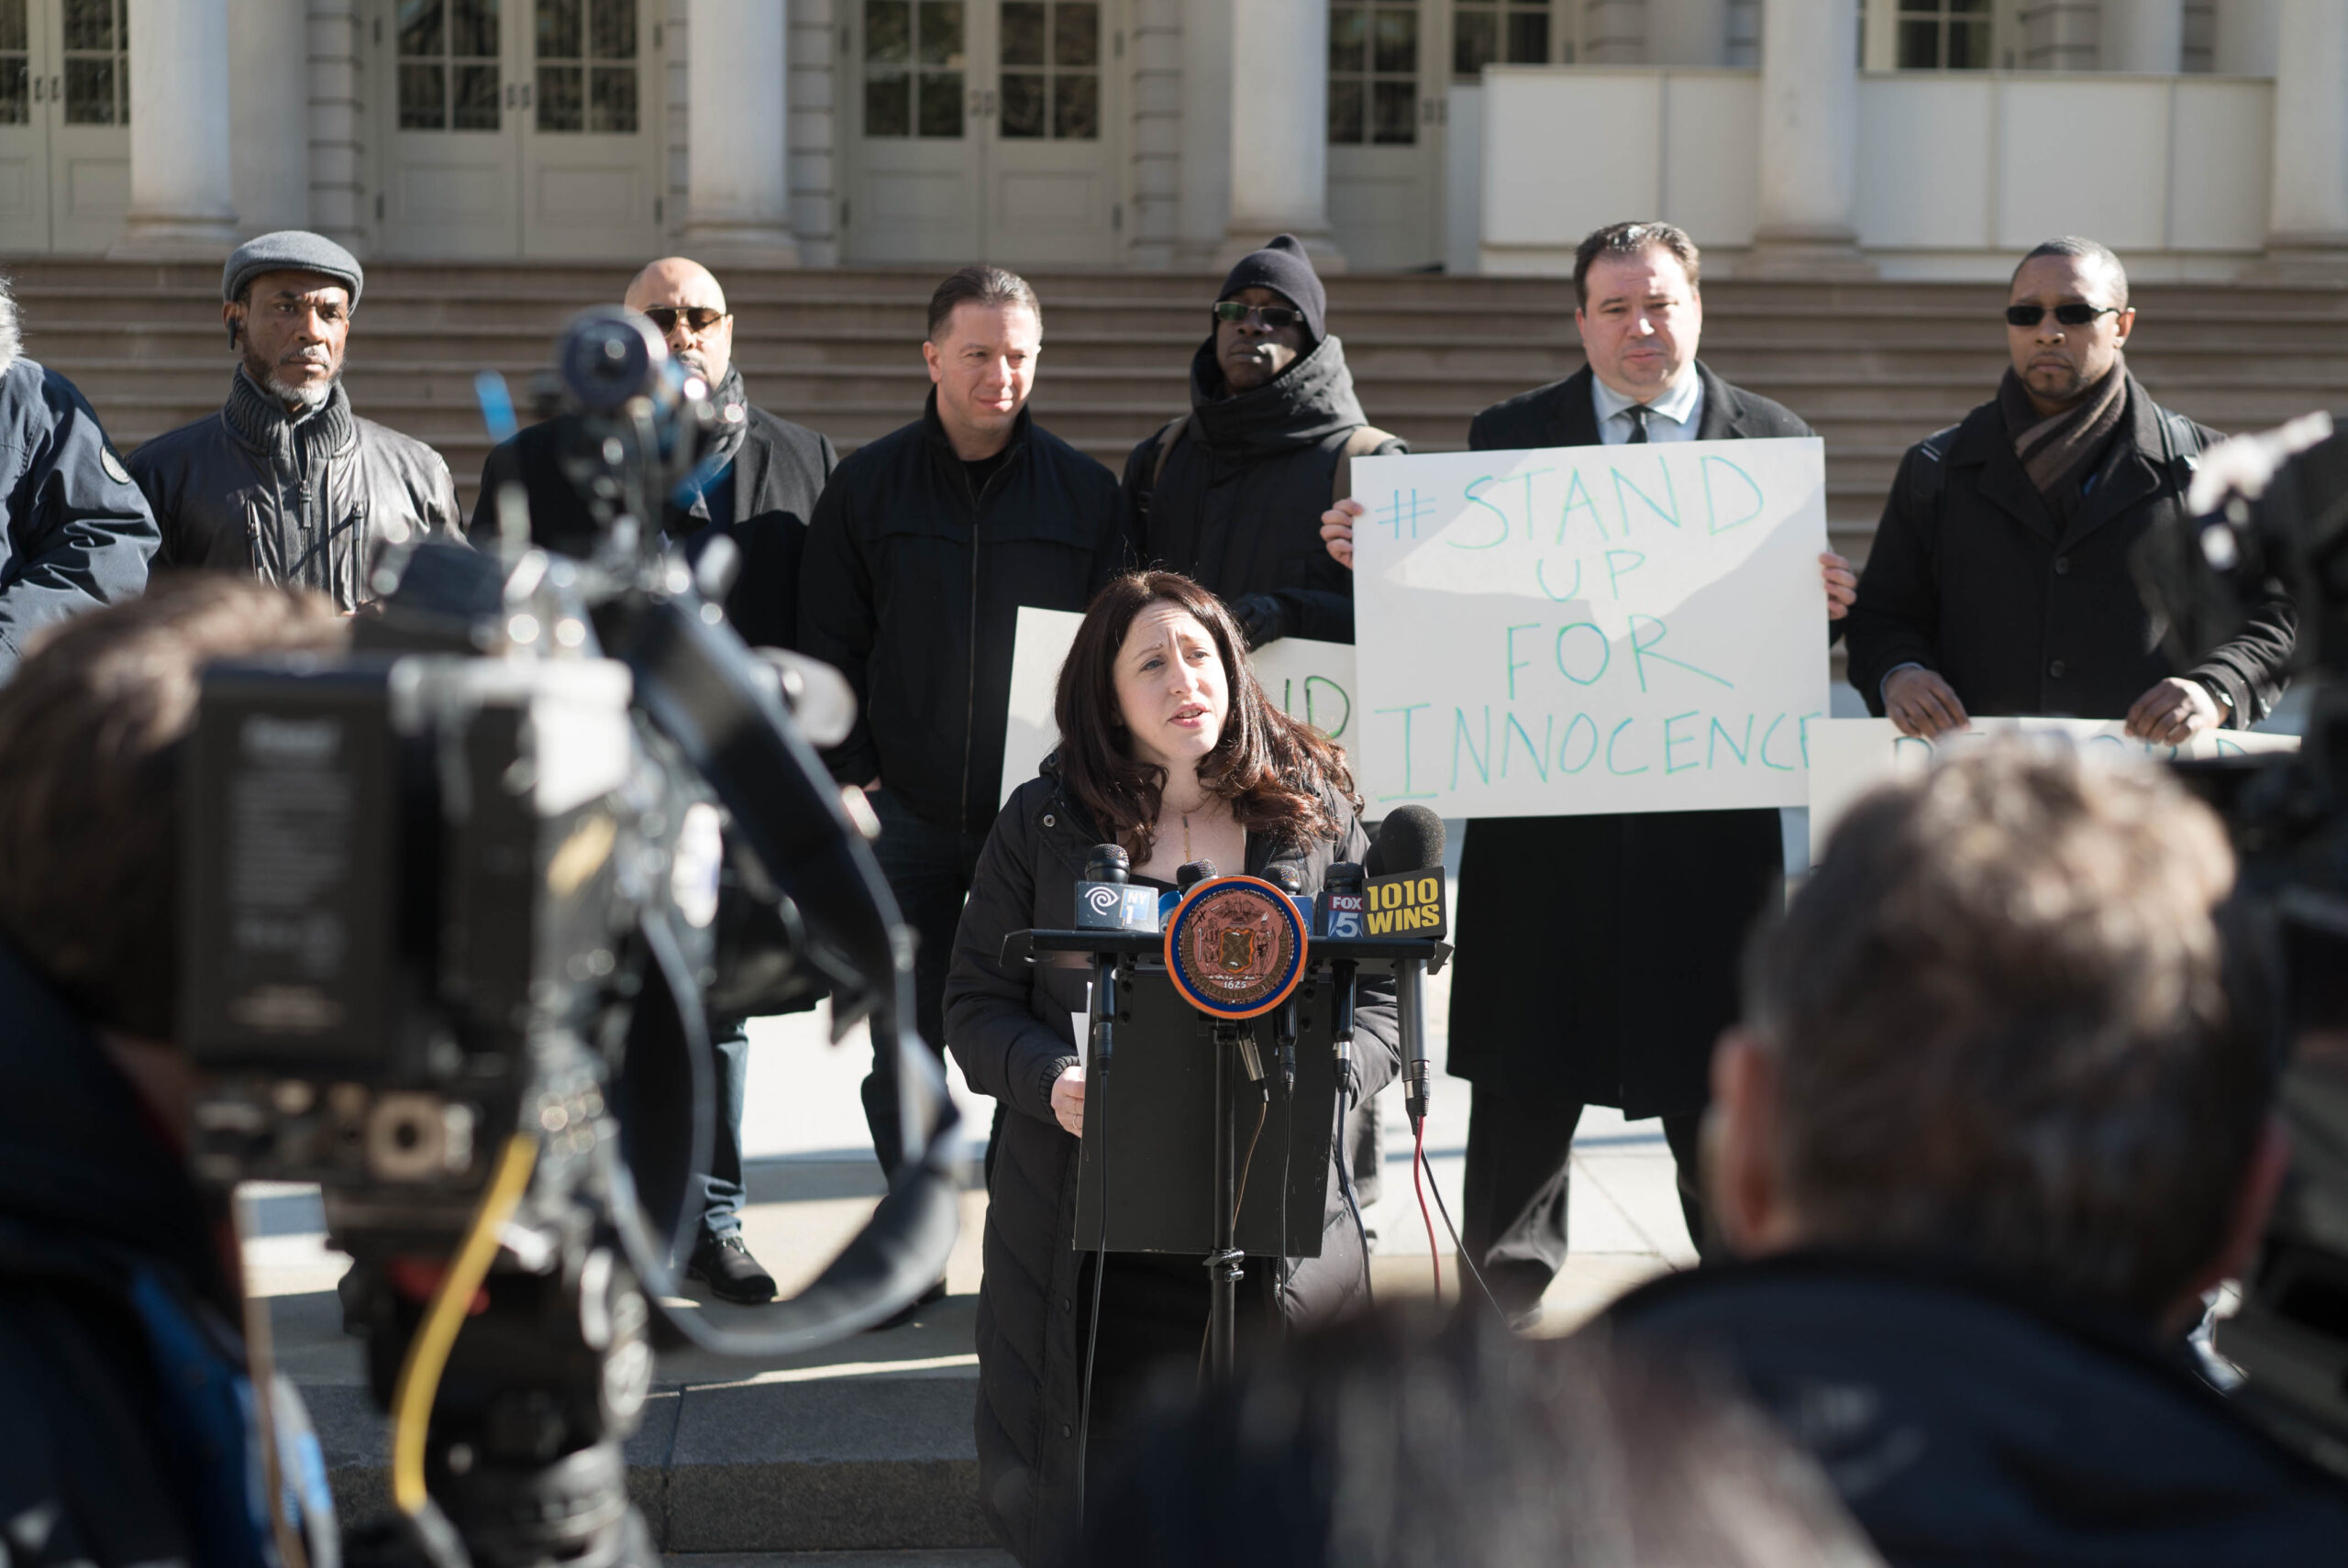 Innocence Project Policy Director Rebecca Brown speaking at City Hall in New York City. Photo by Sameer Abdel-Khalek/Innocence Project.